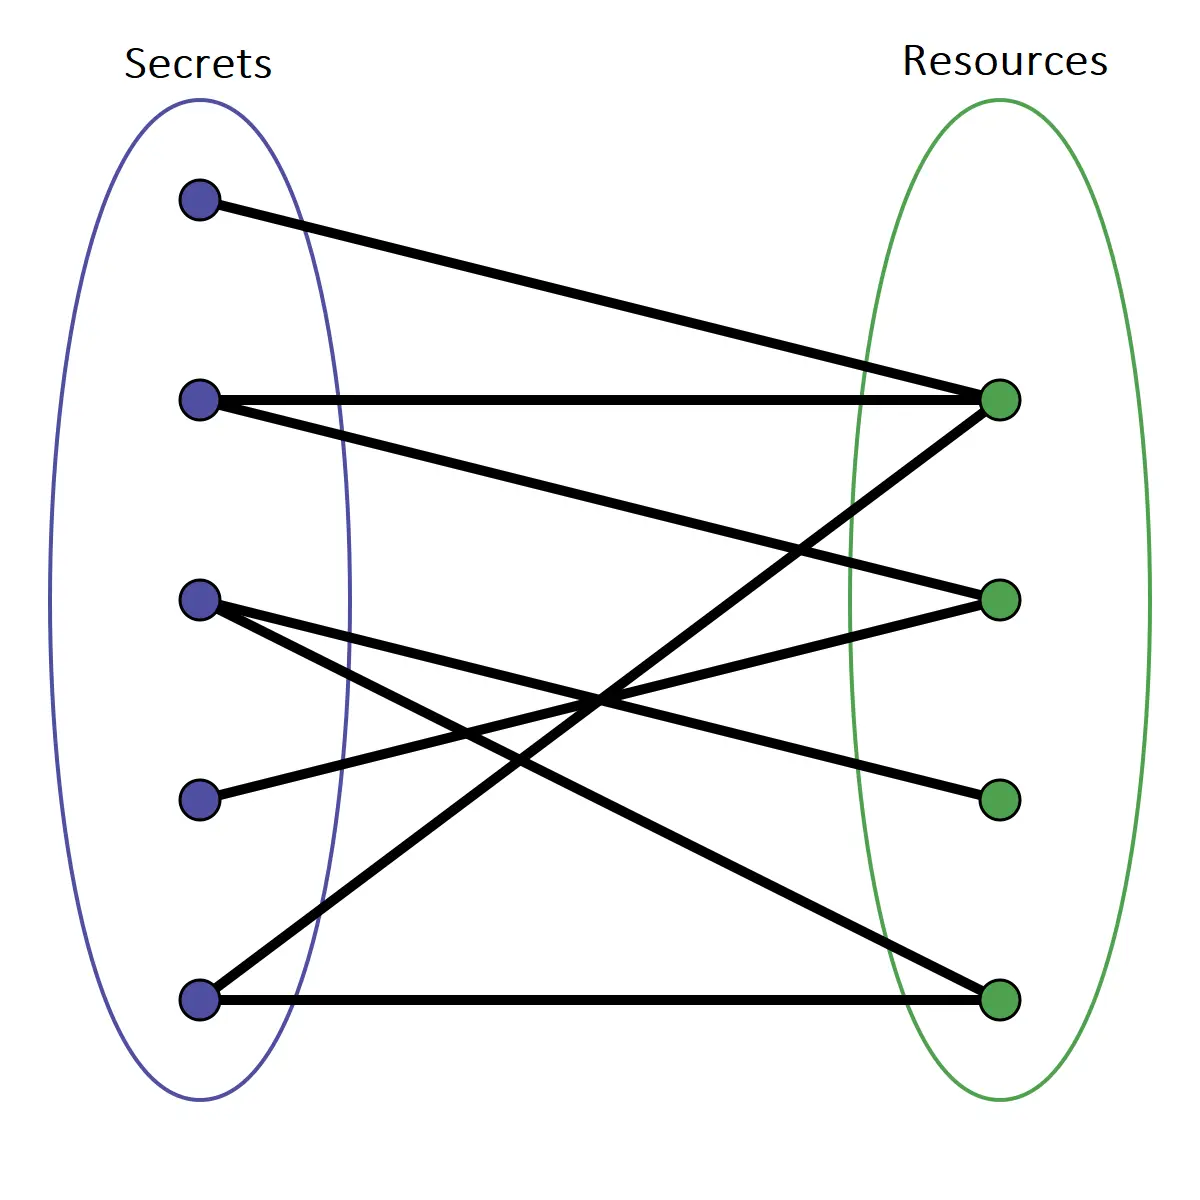 bipartite graph showing the relationship between secrets and resources